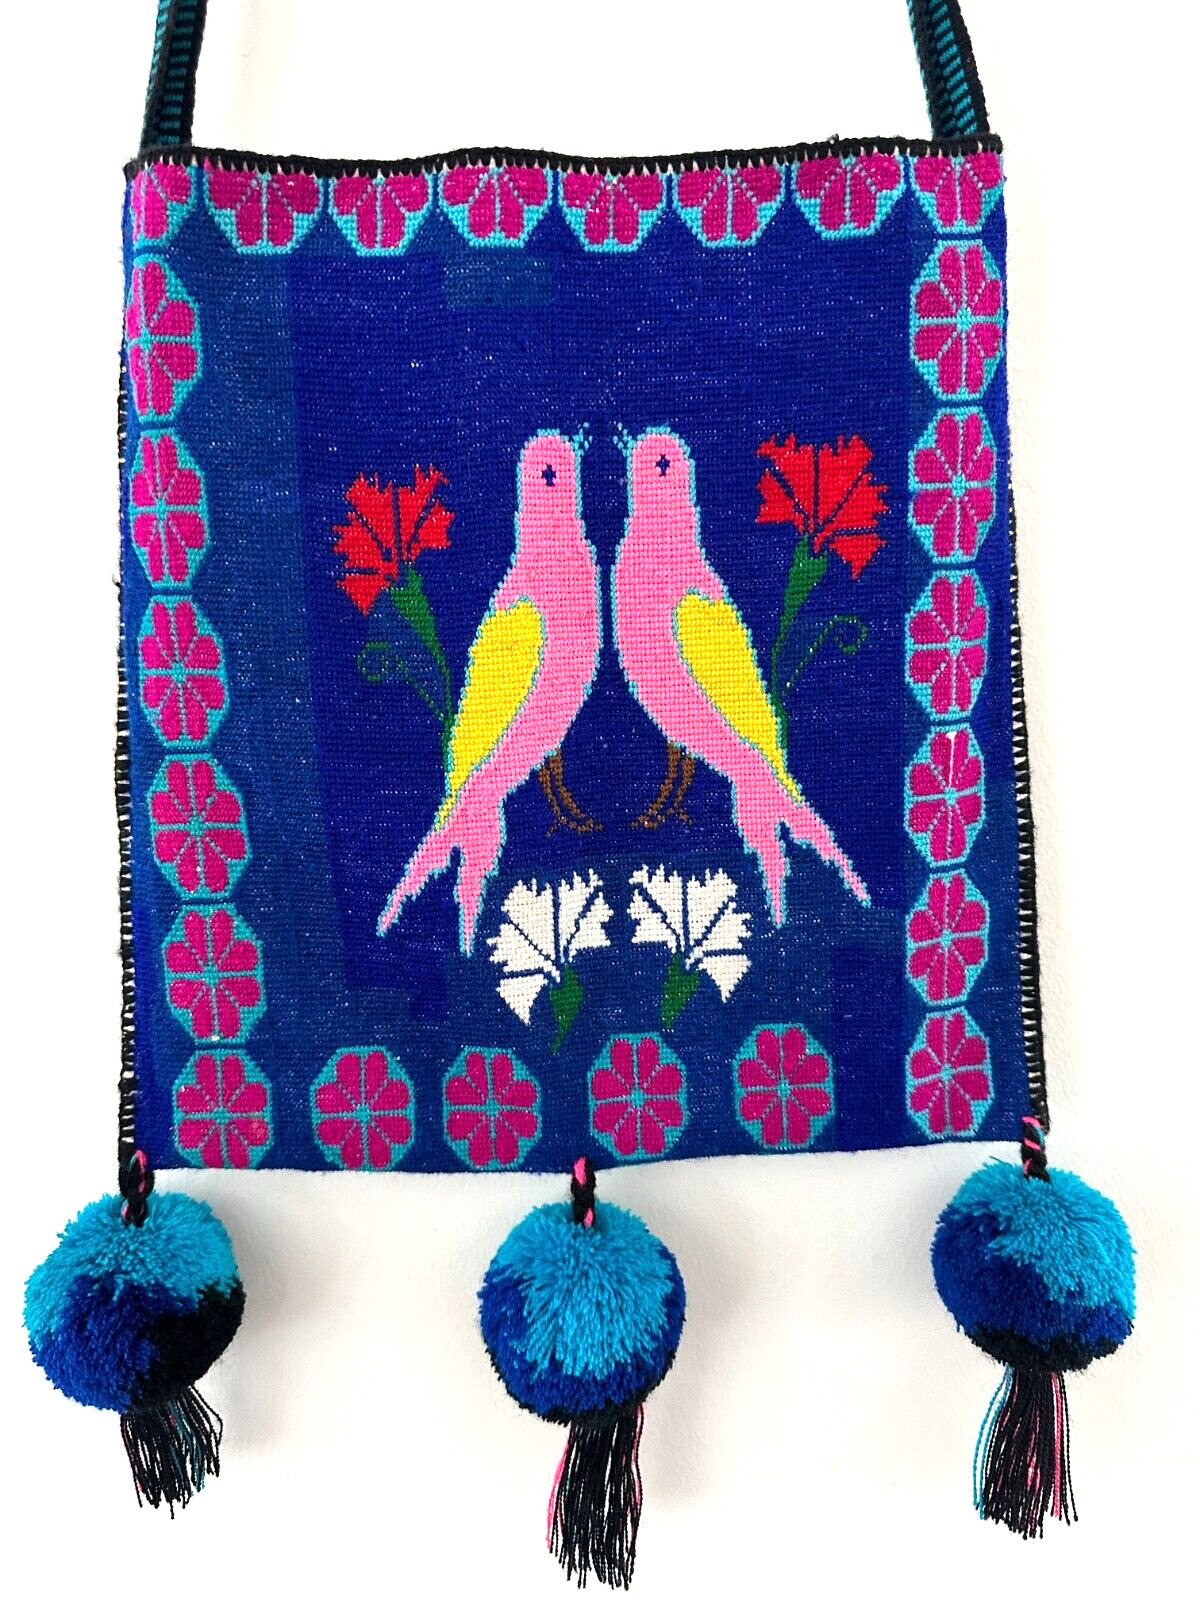 Huichol Indian Mexico Cross Stitched Hand Made Indigenous Bag Love Birds Flowers